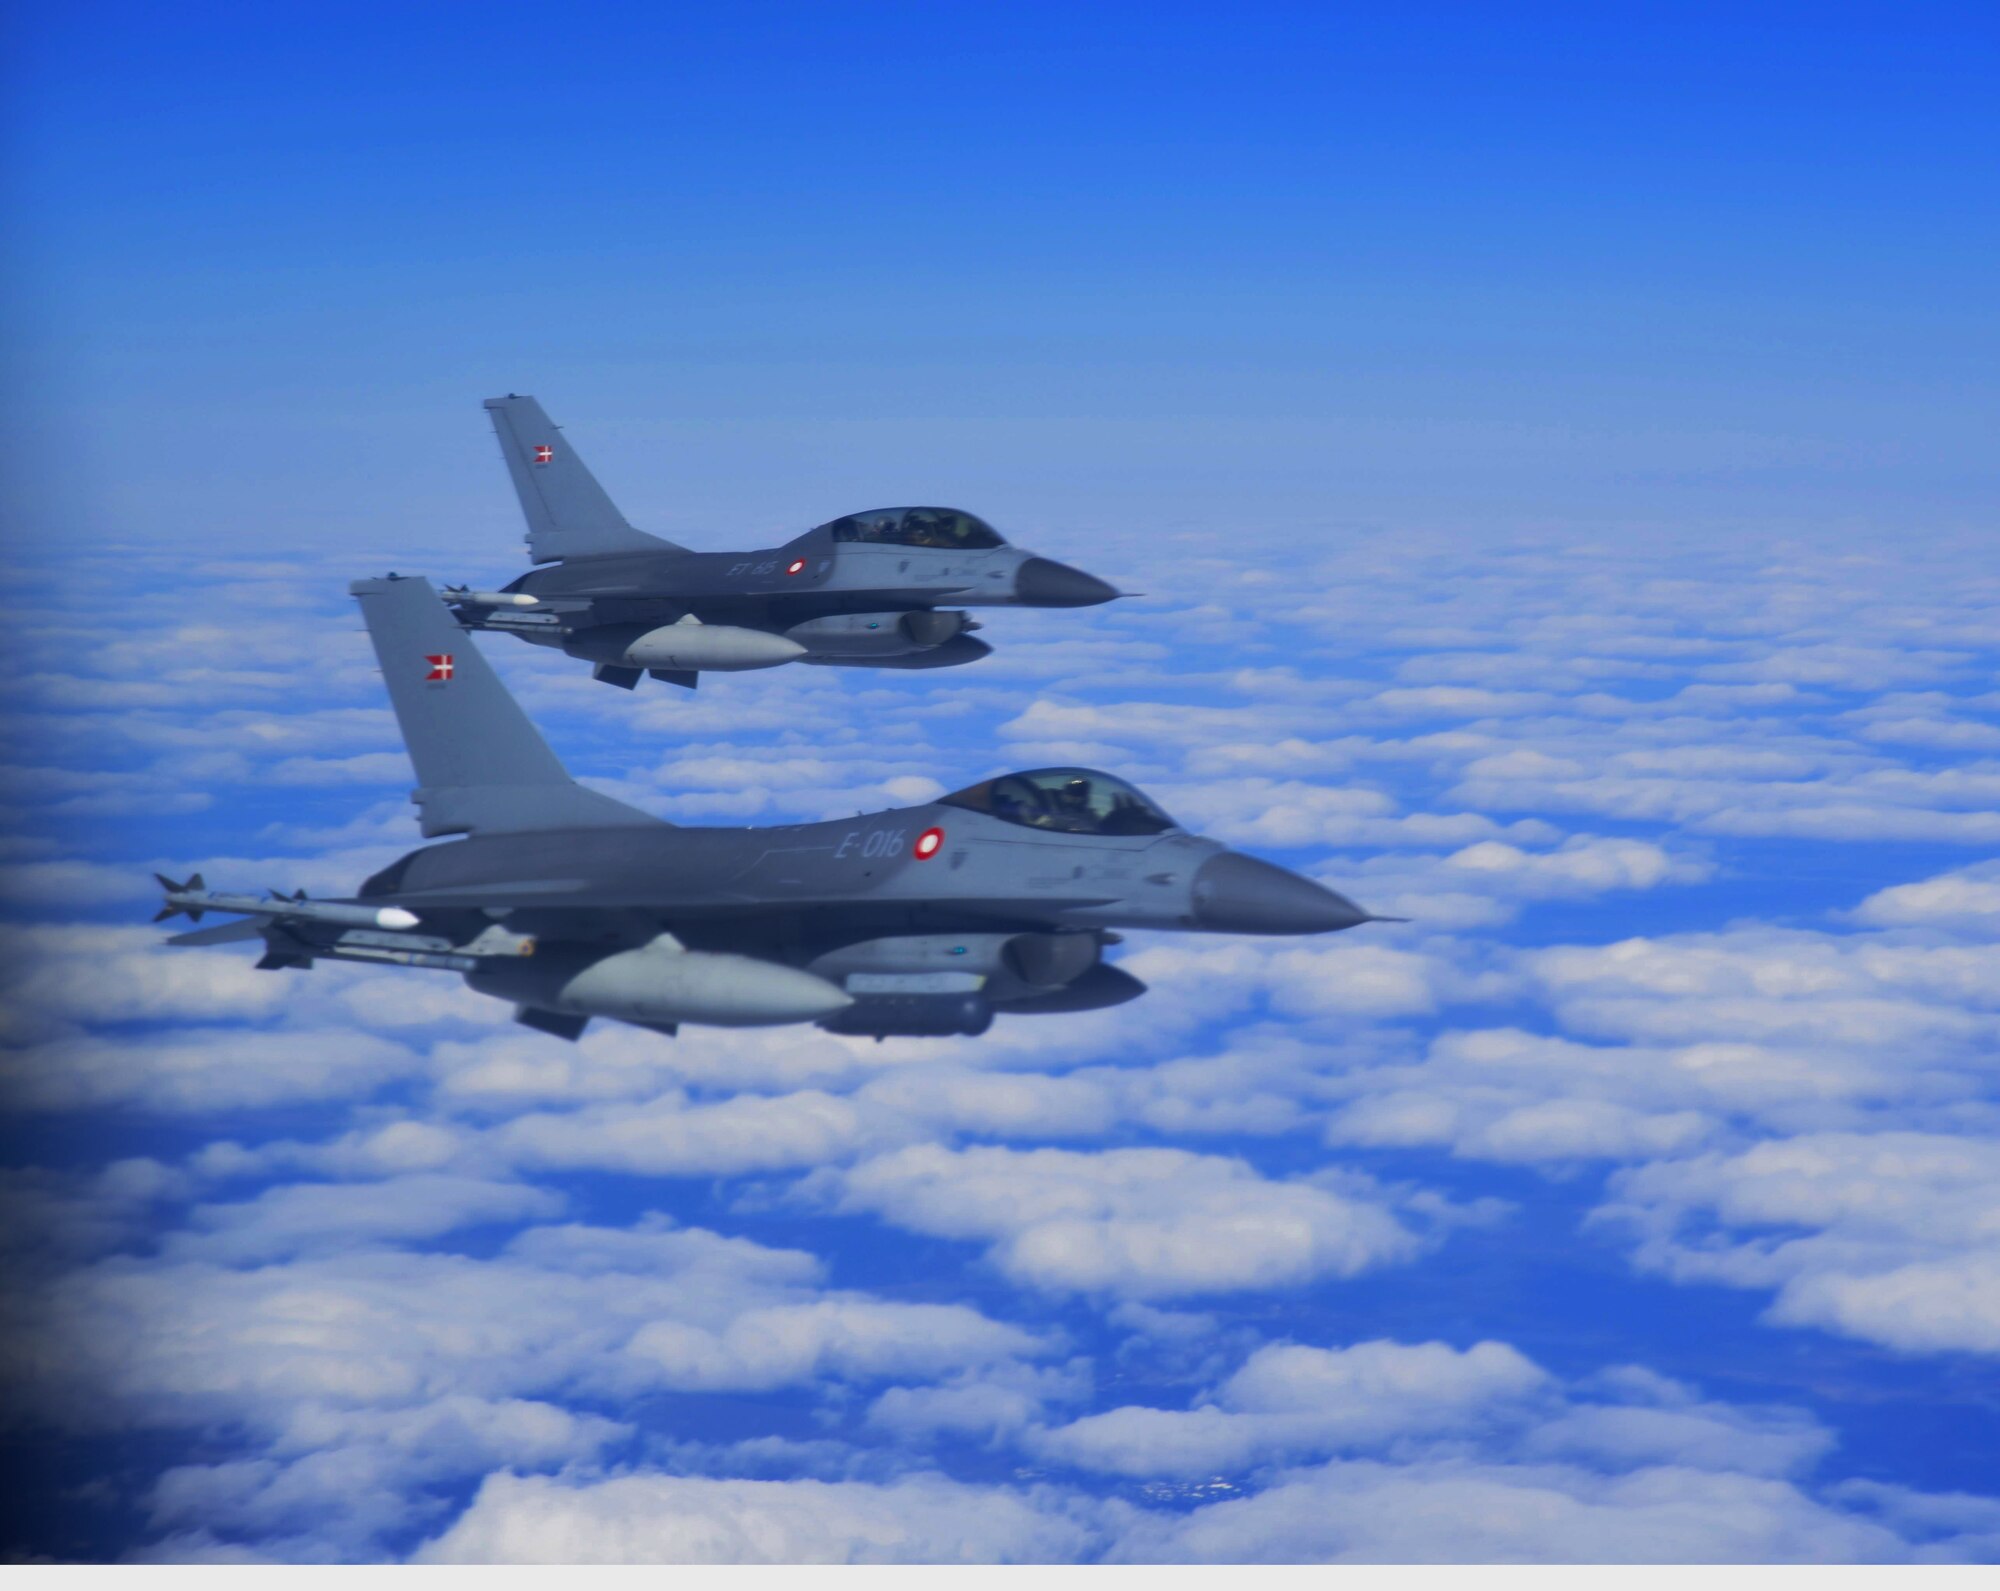 Royal Danish Air Force F-16C and F-16D exit refueling from the KC-135 Stratotanker, McGuire Air Force Base N.J., over Finland, May 24, 2019. The aircraft are supporting Arctic Challenge Exercise 19, a Nordic aviation exercise intended to provide scenario-based training to prepare partner forces for enemy defensive systems. (U.S. Air National Guard photo by Staff Sgt. Kenneth Shaner Brown)